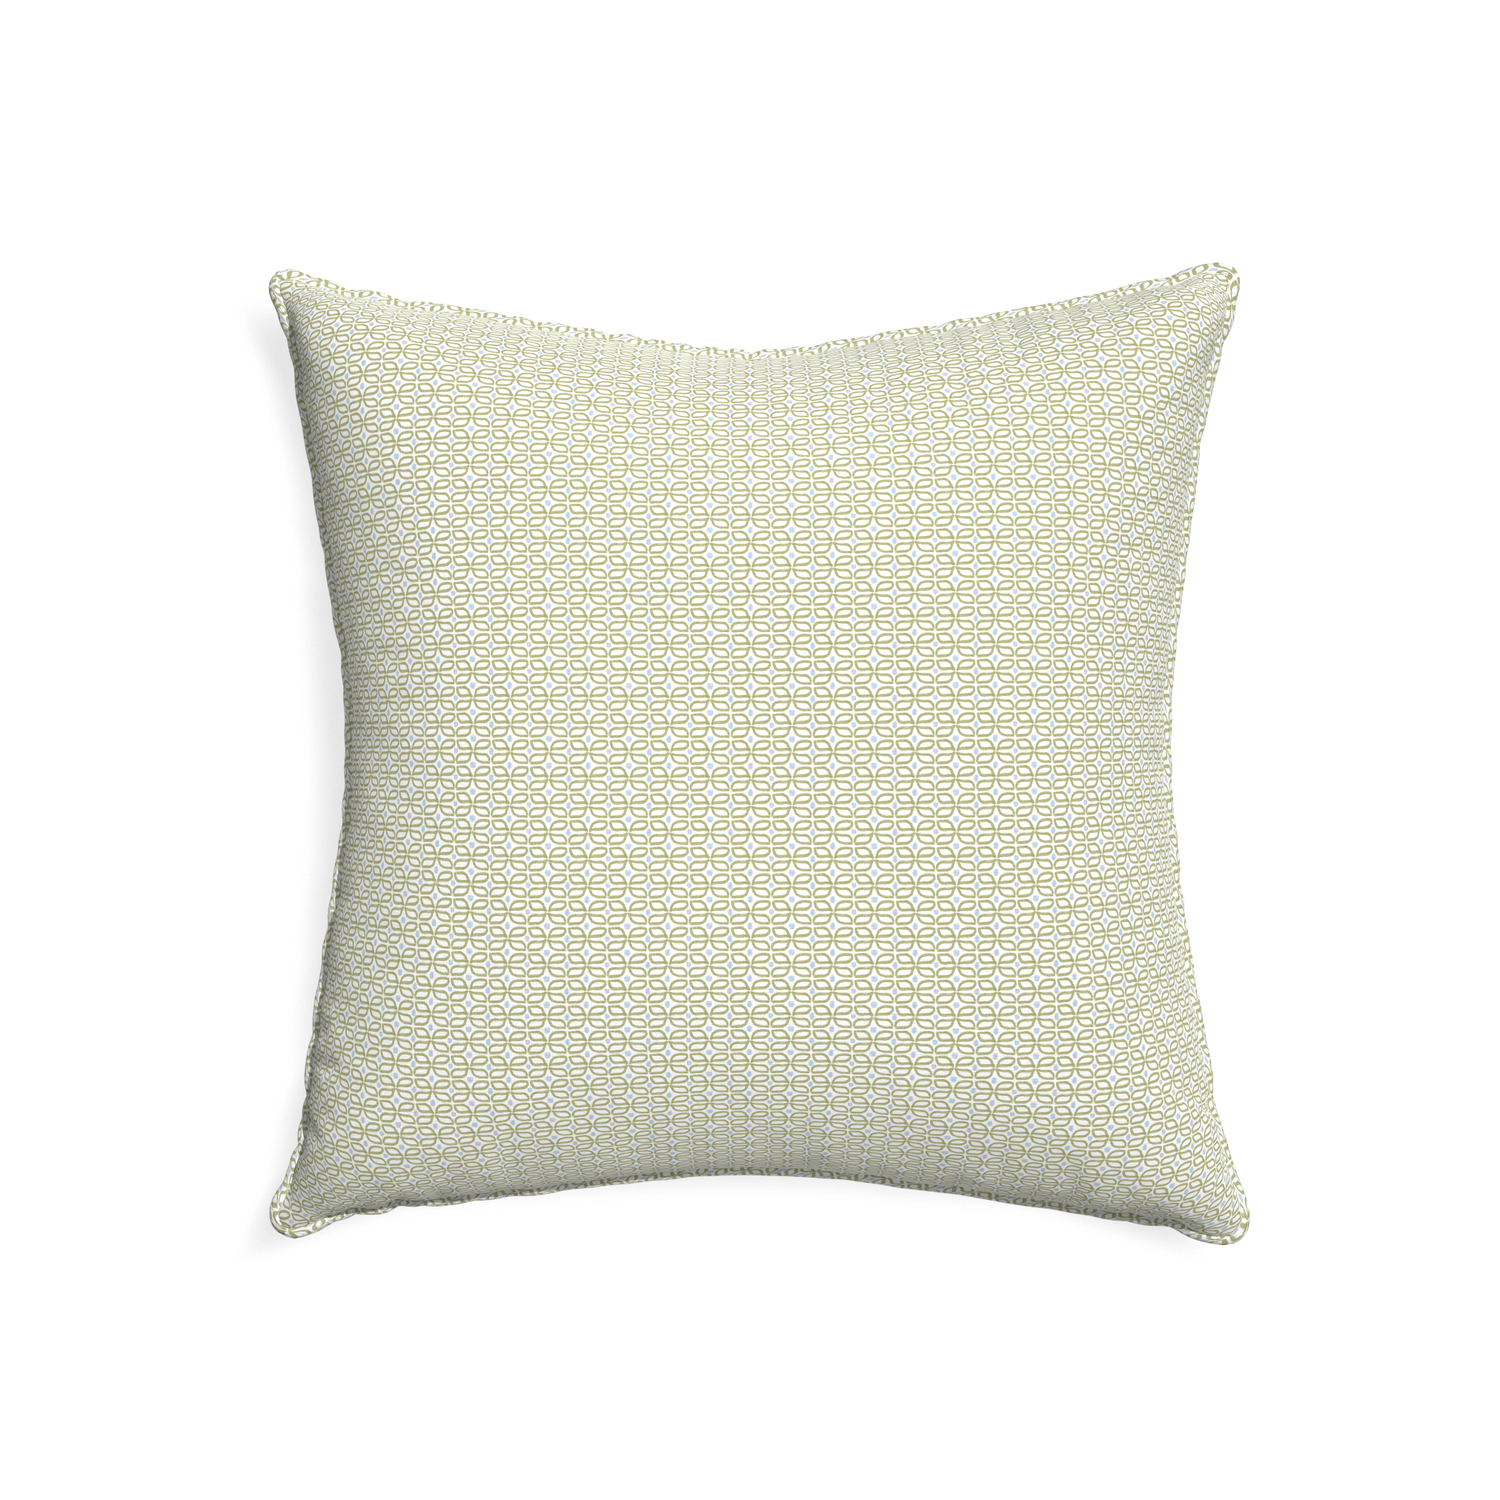 22-square loomi moss custom moss green geometricpillow with l piping on white background